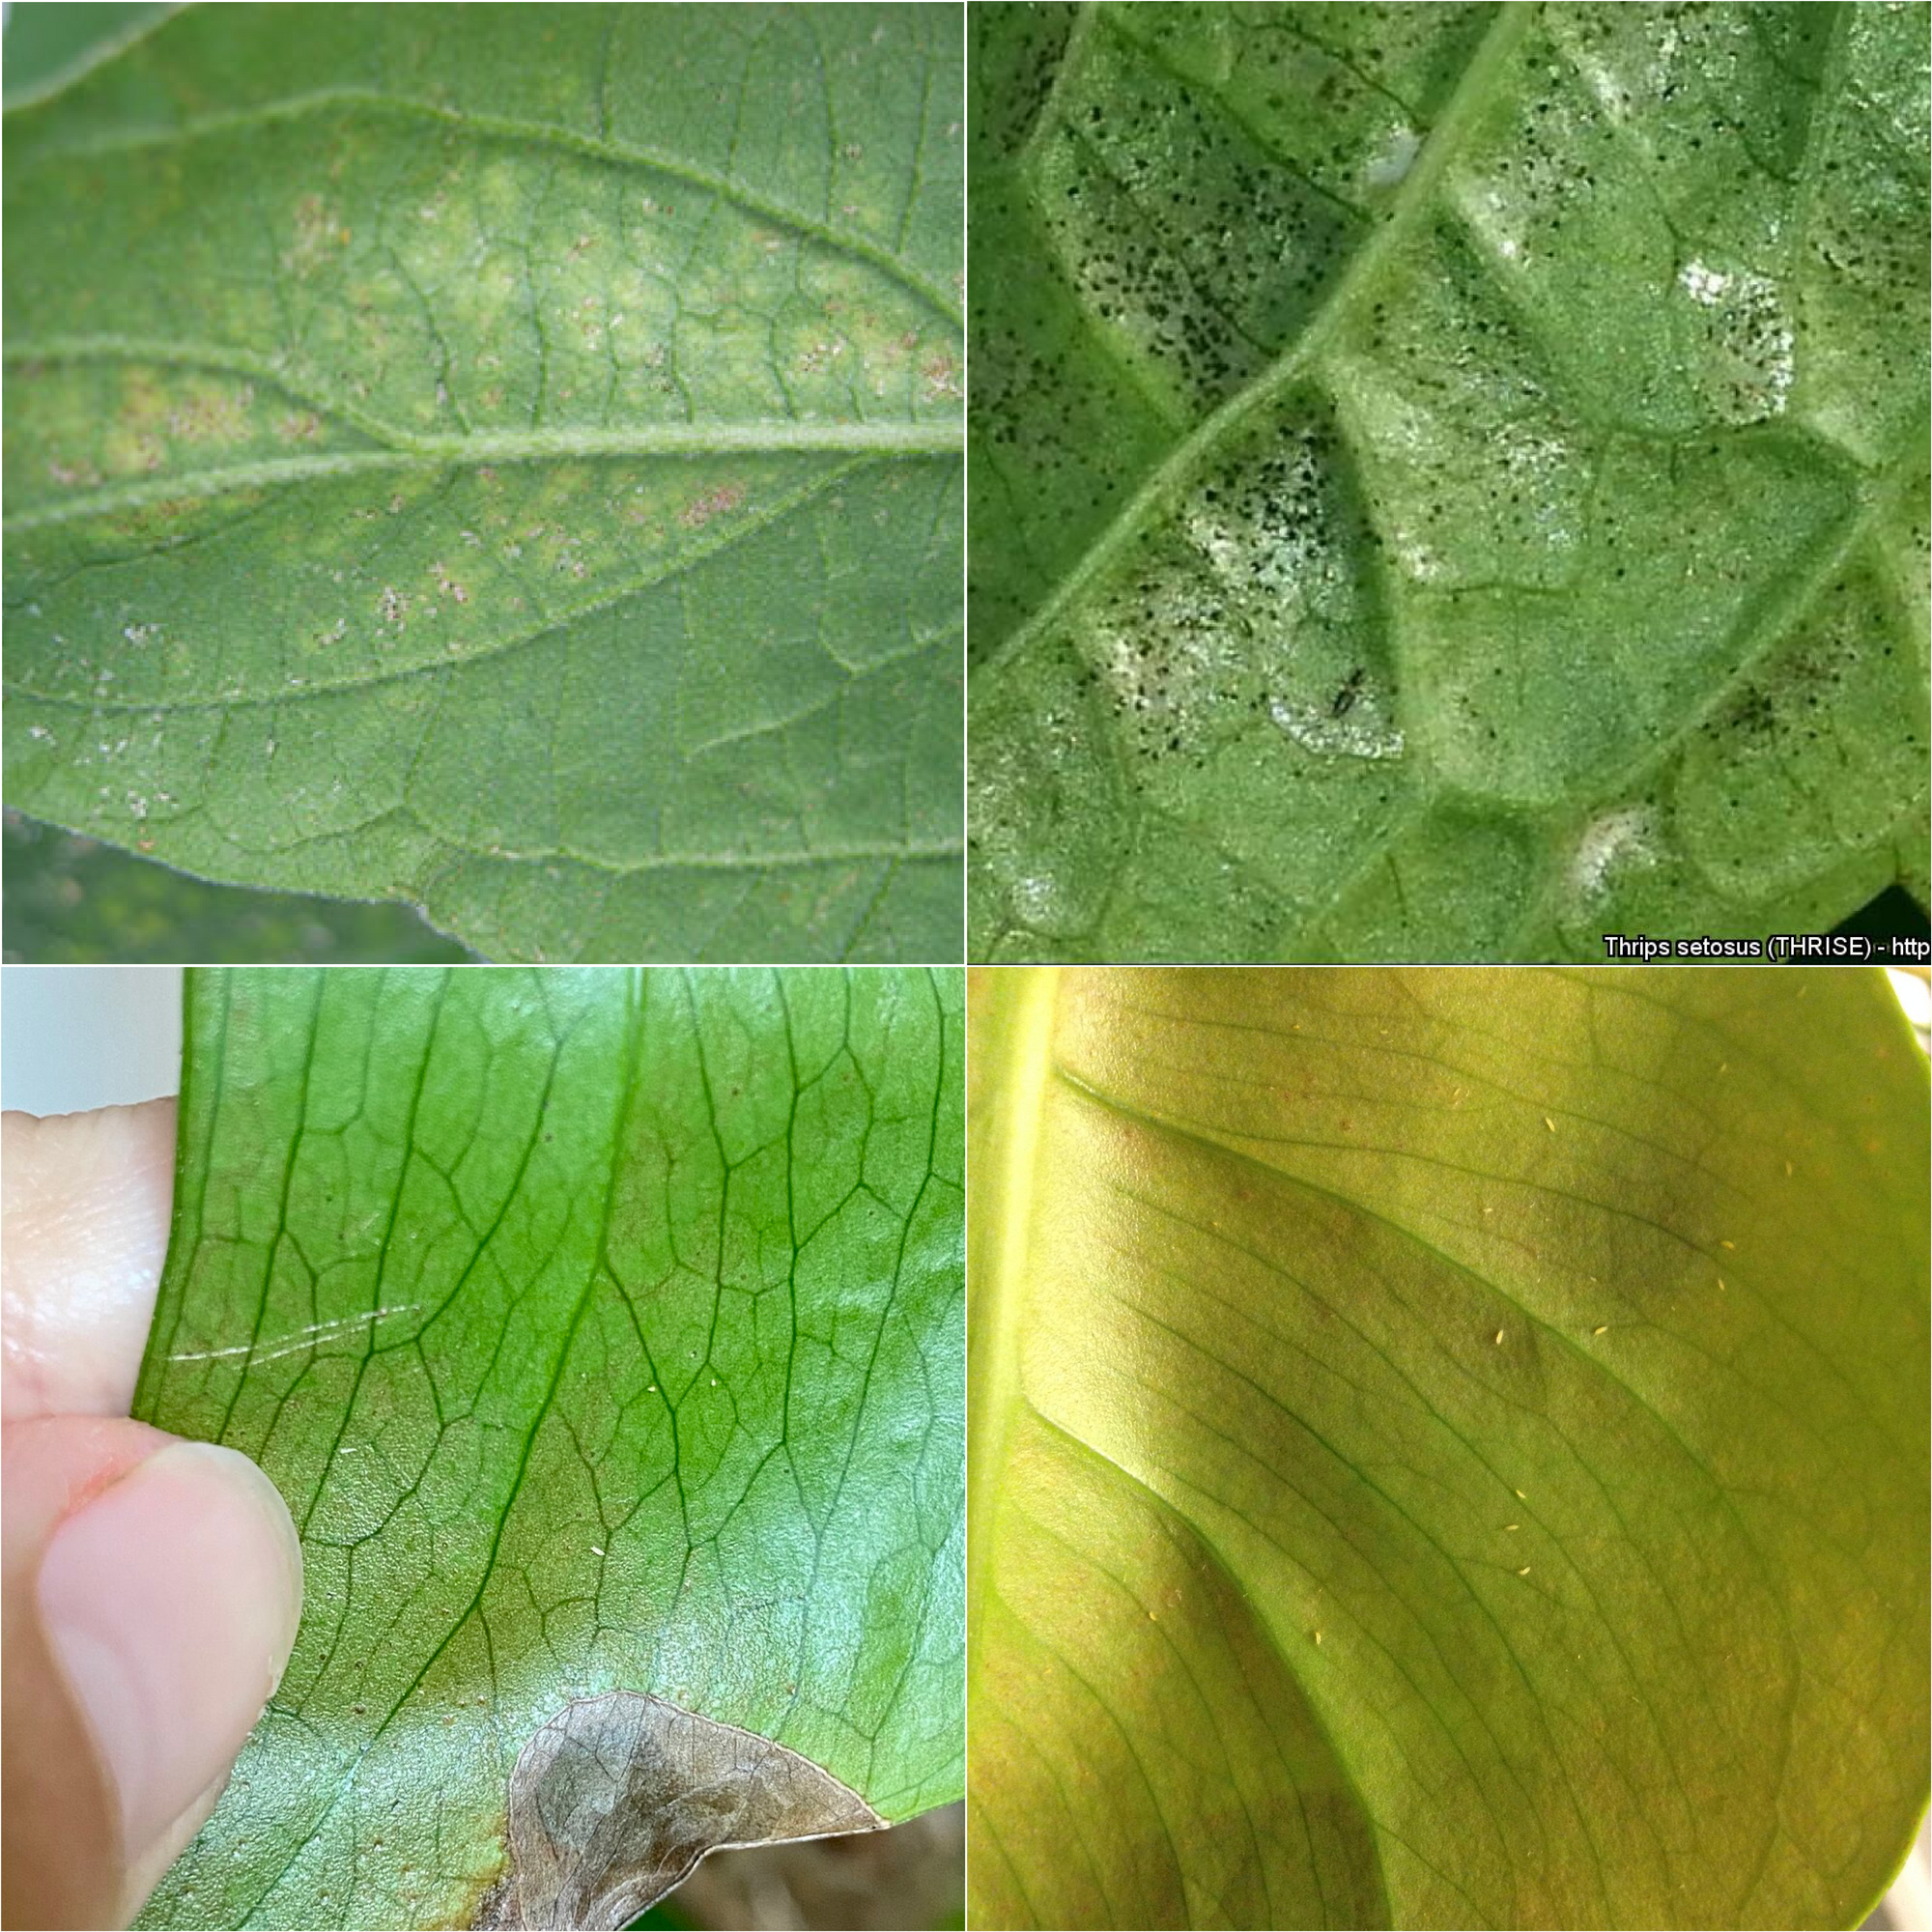 Thrips on Houseplants: 6 Top Steps to Treat (and prevent)